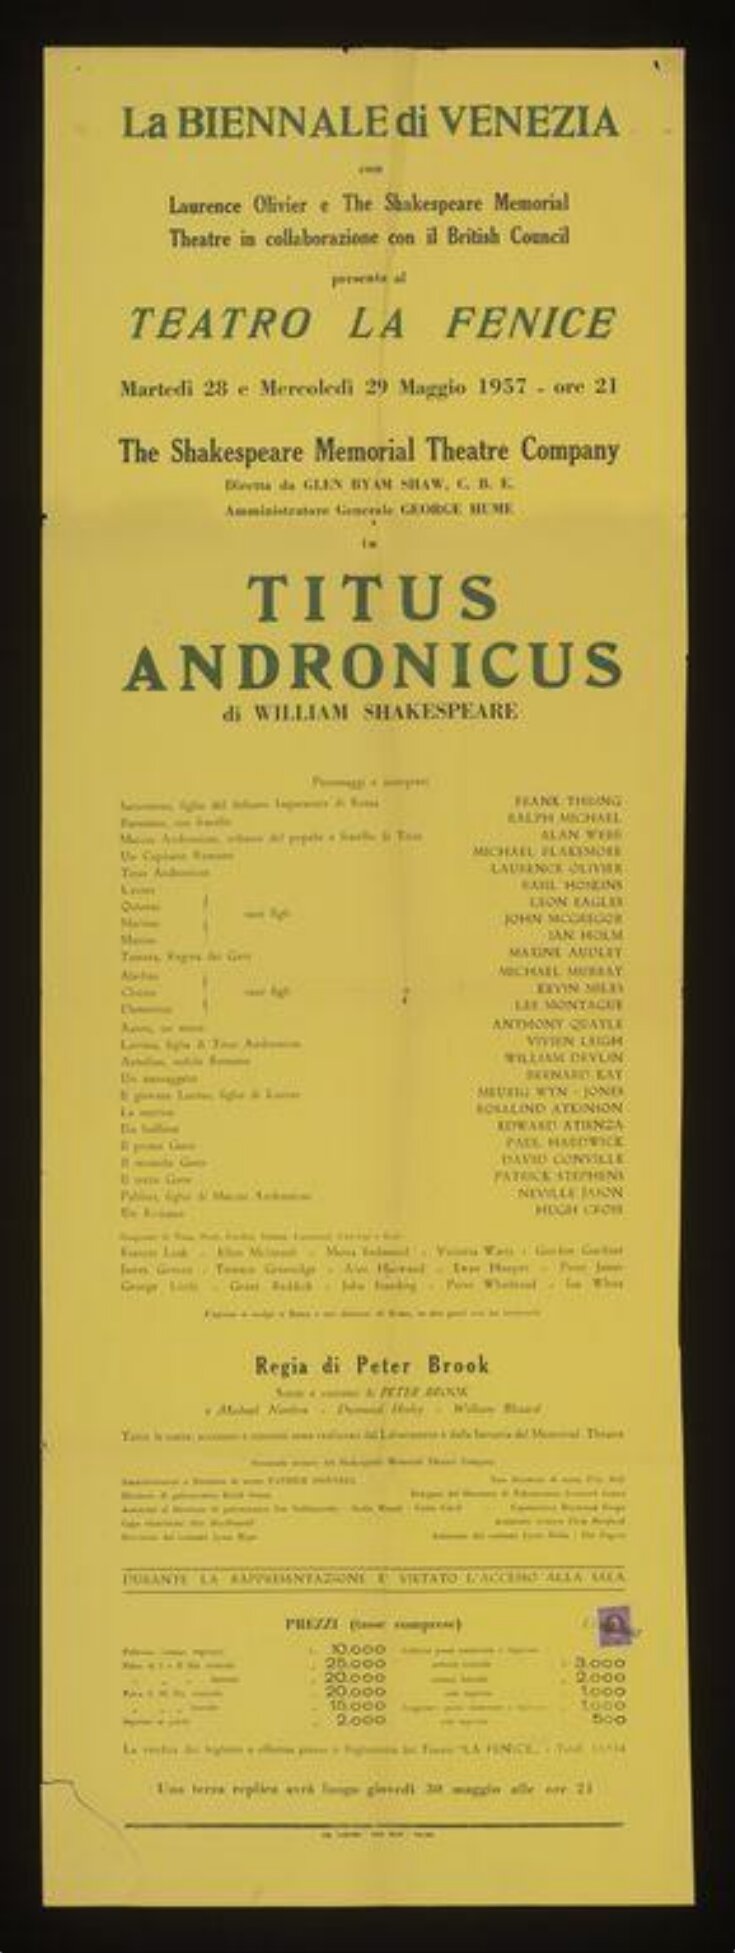 Titus Andronicus top image